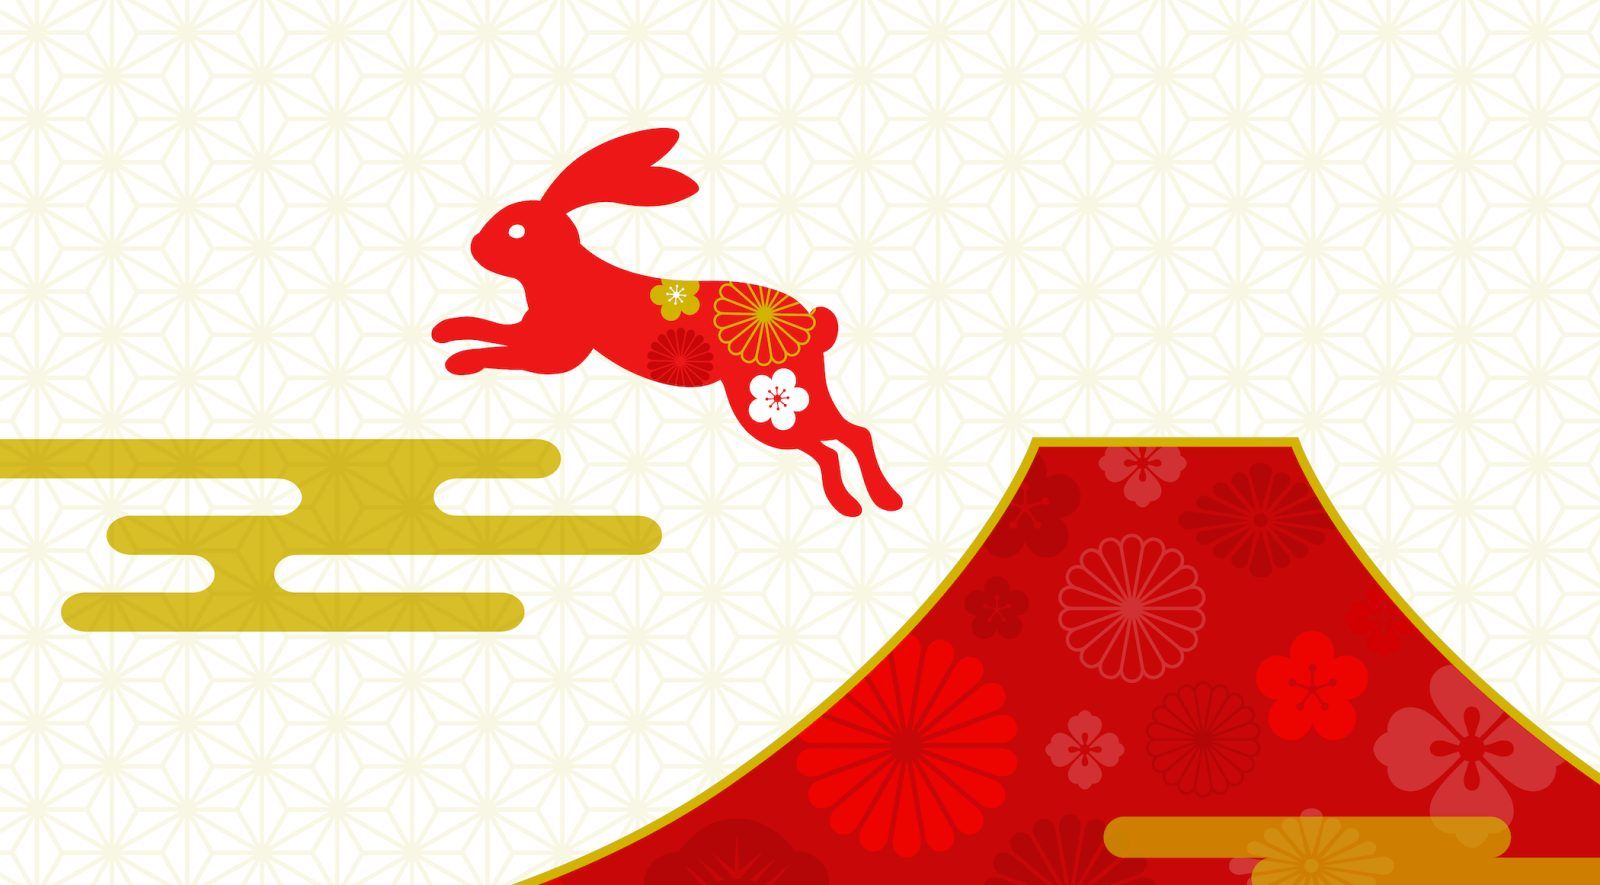 Year Of The Rabbit 2023: Predictions For All 12 Chinese Zodiac Signs